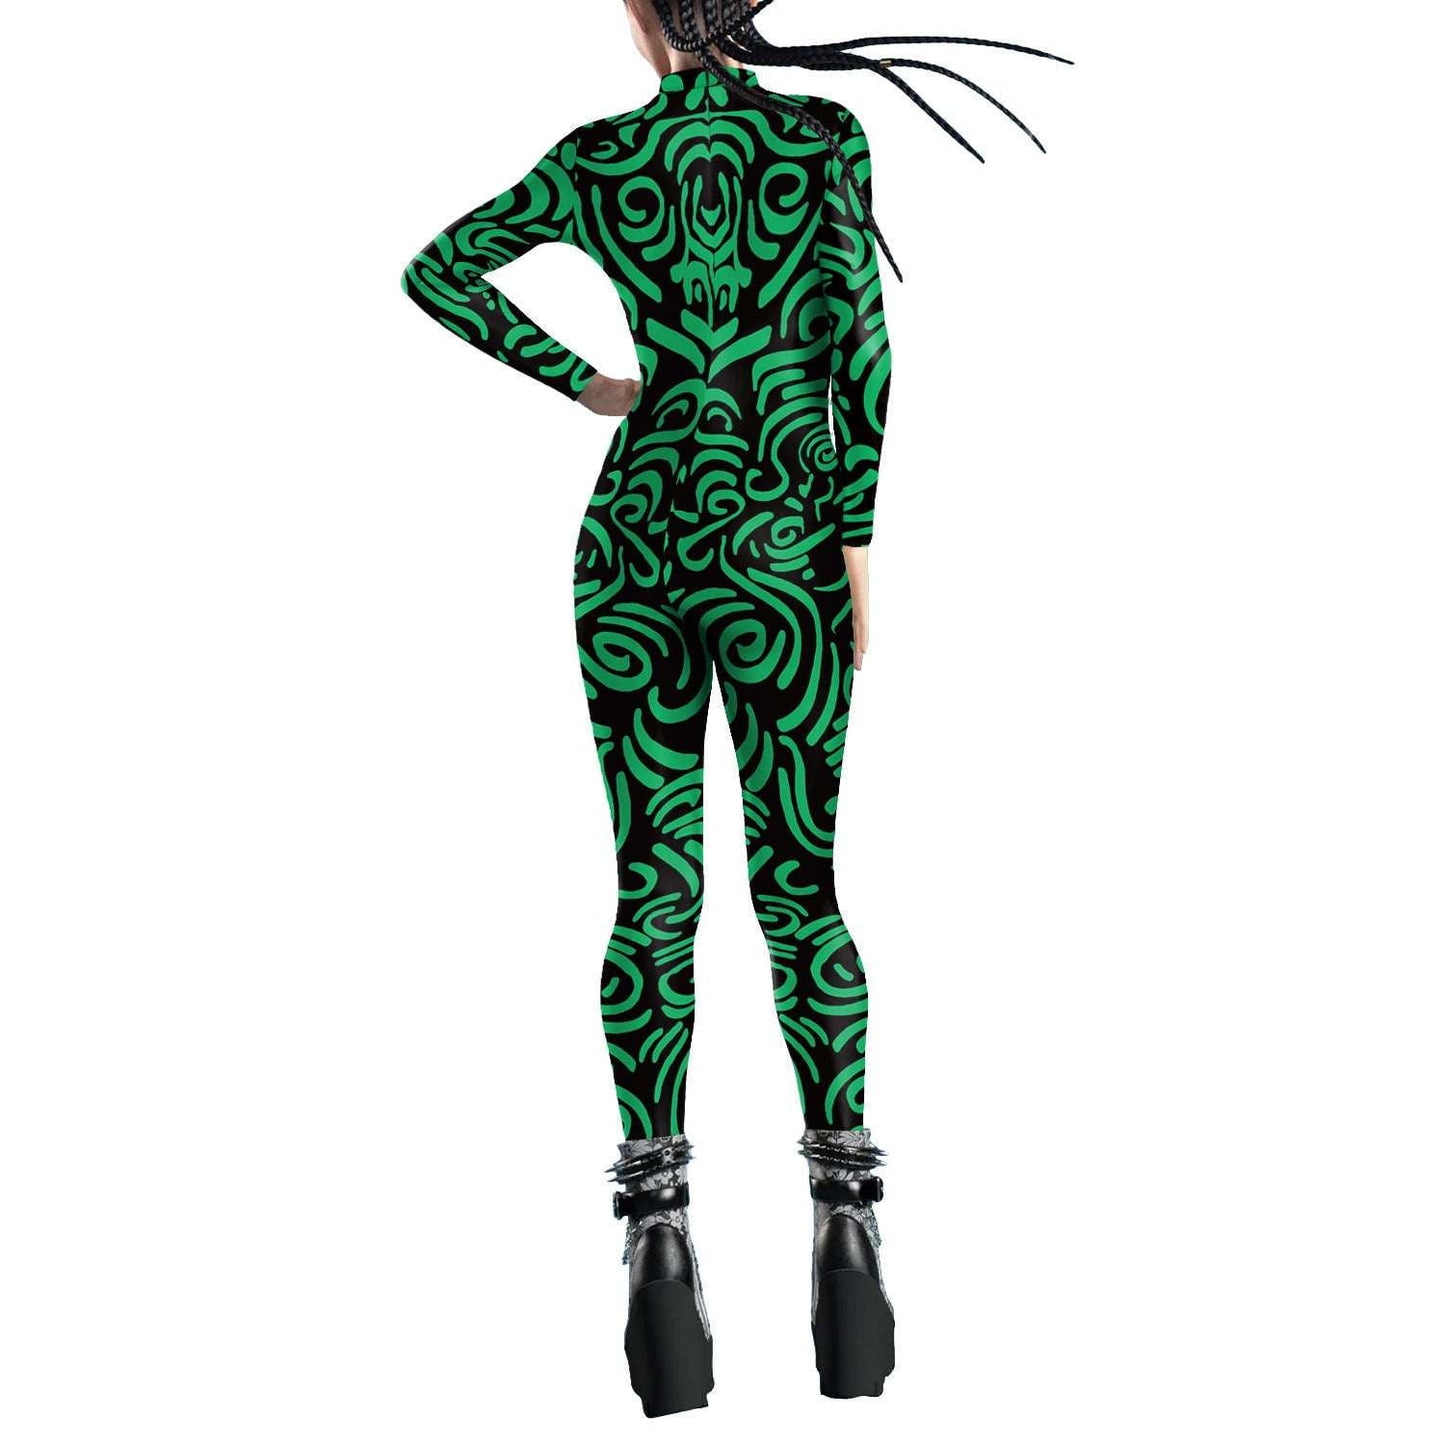 Fashionable Printed Onesie, Geometric Print Jumpsuit, Stylish Women's Jumpsuit - available at Sparq Mart